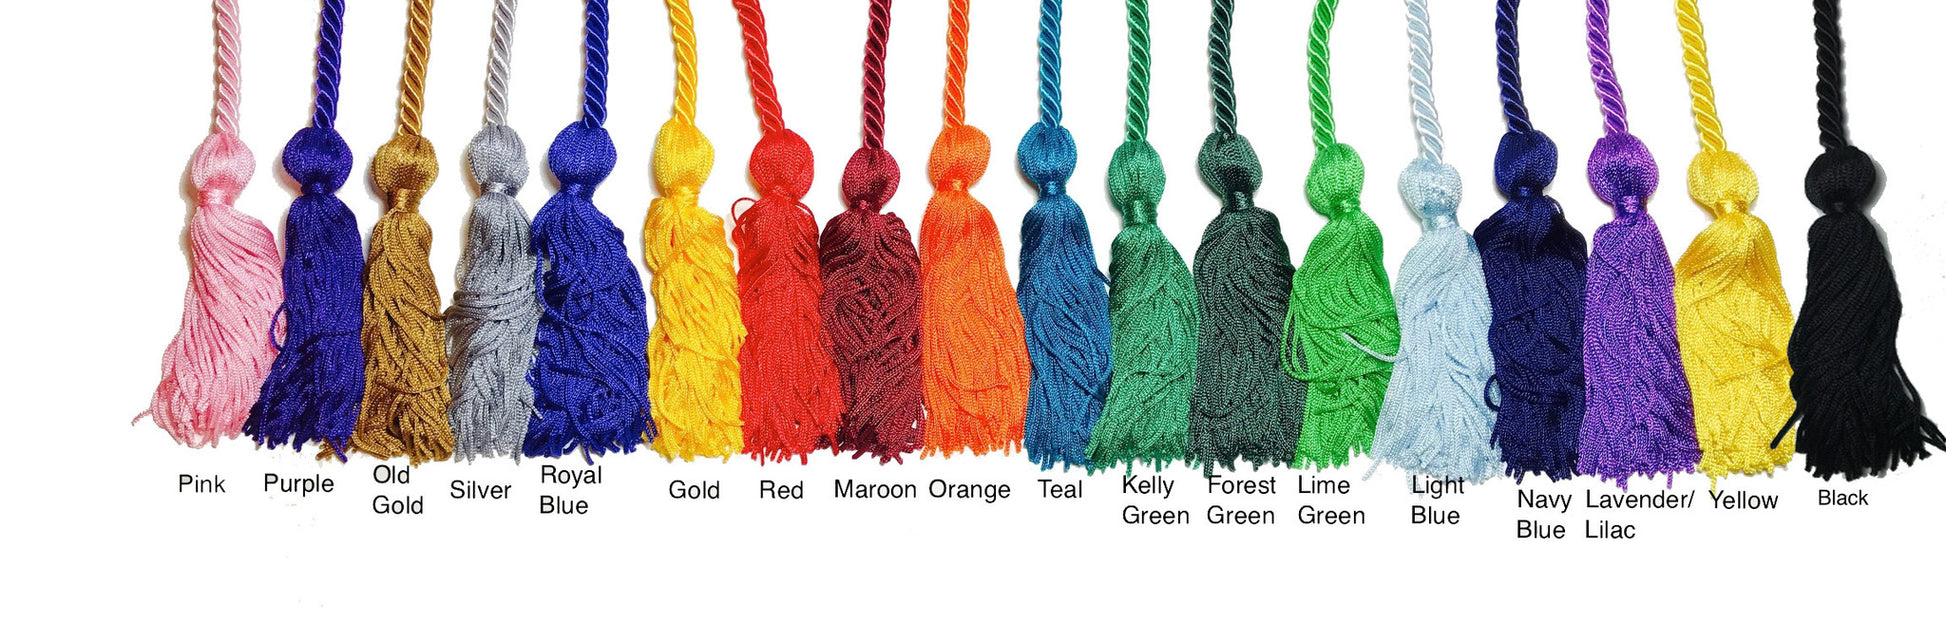 Graduation Honor Cords (21 Colors Available) - Honor Cord Source 